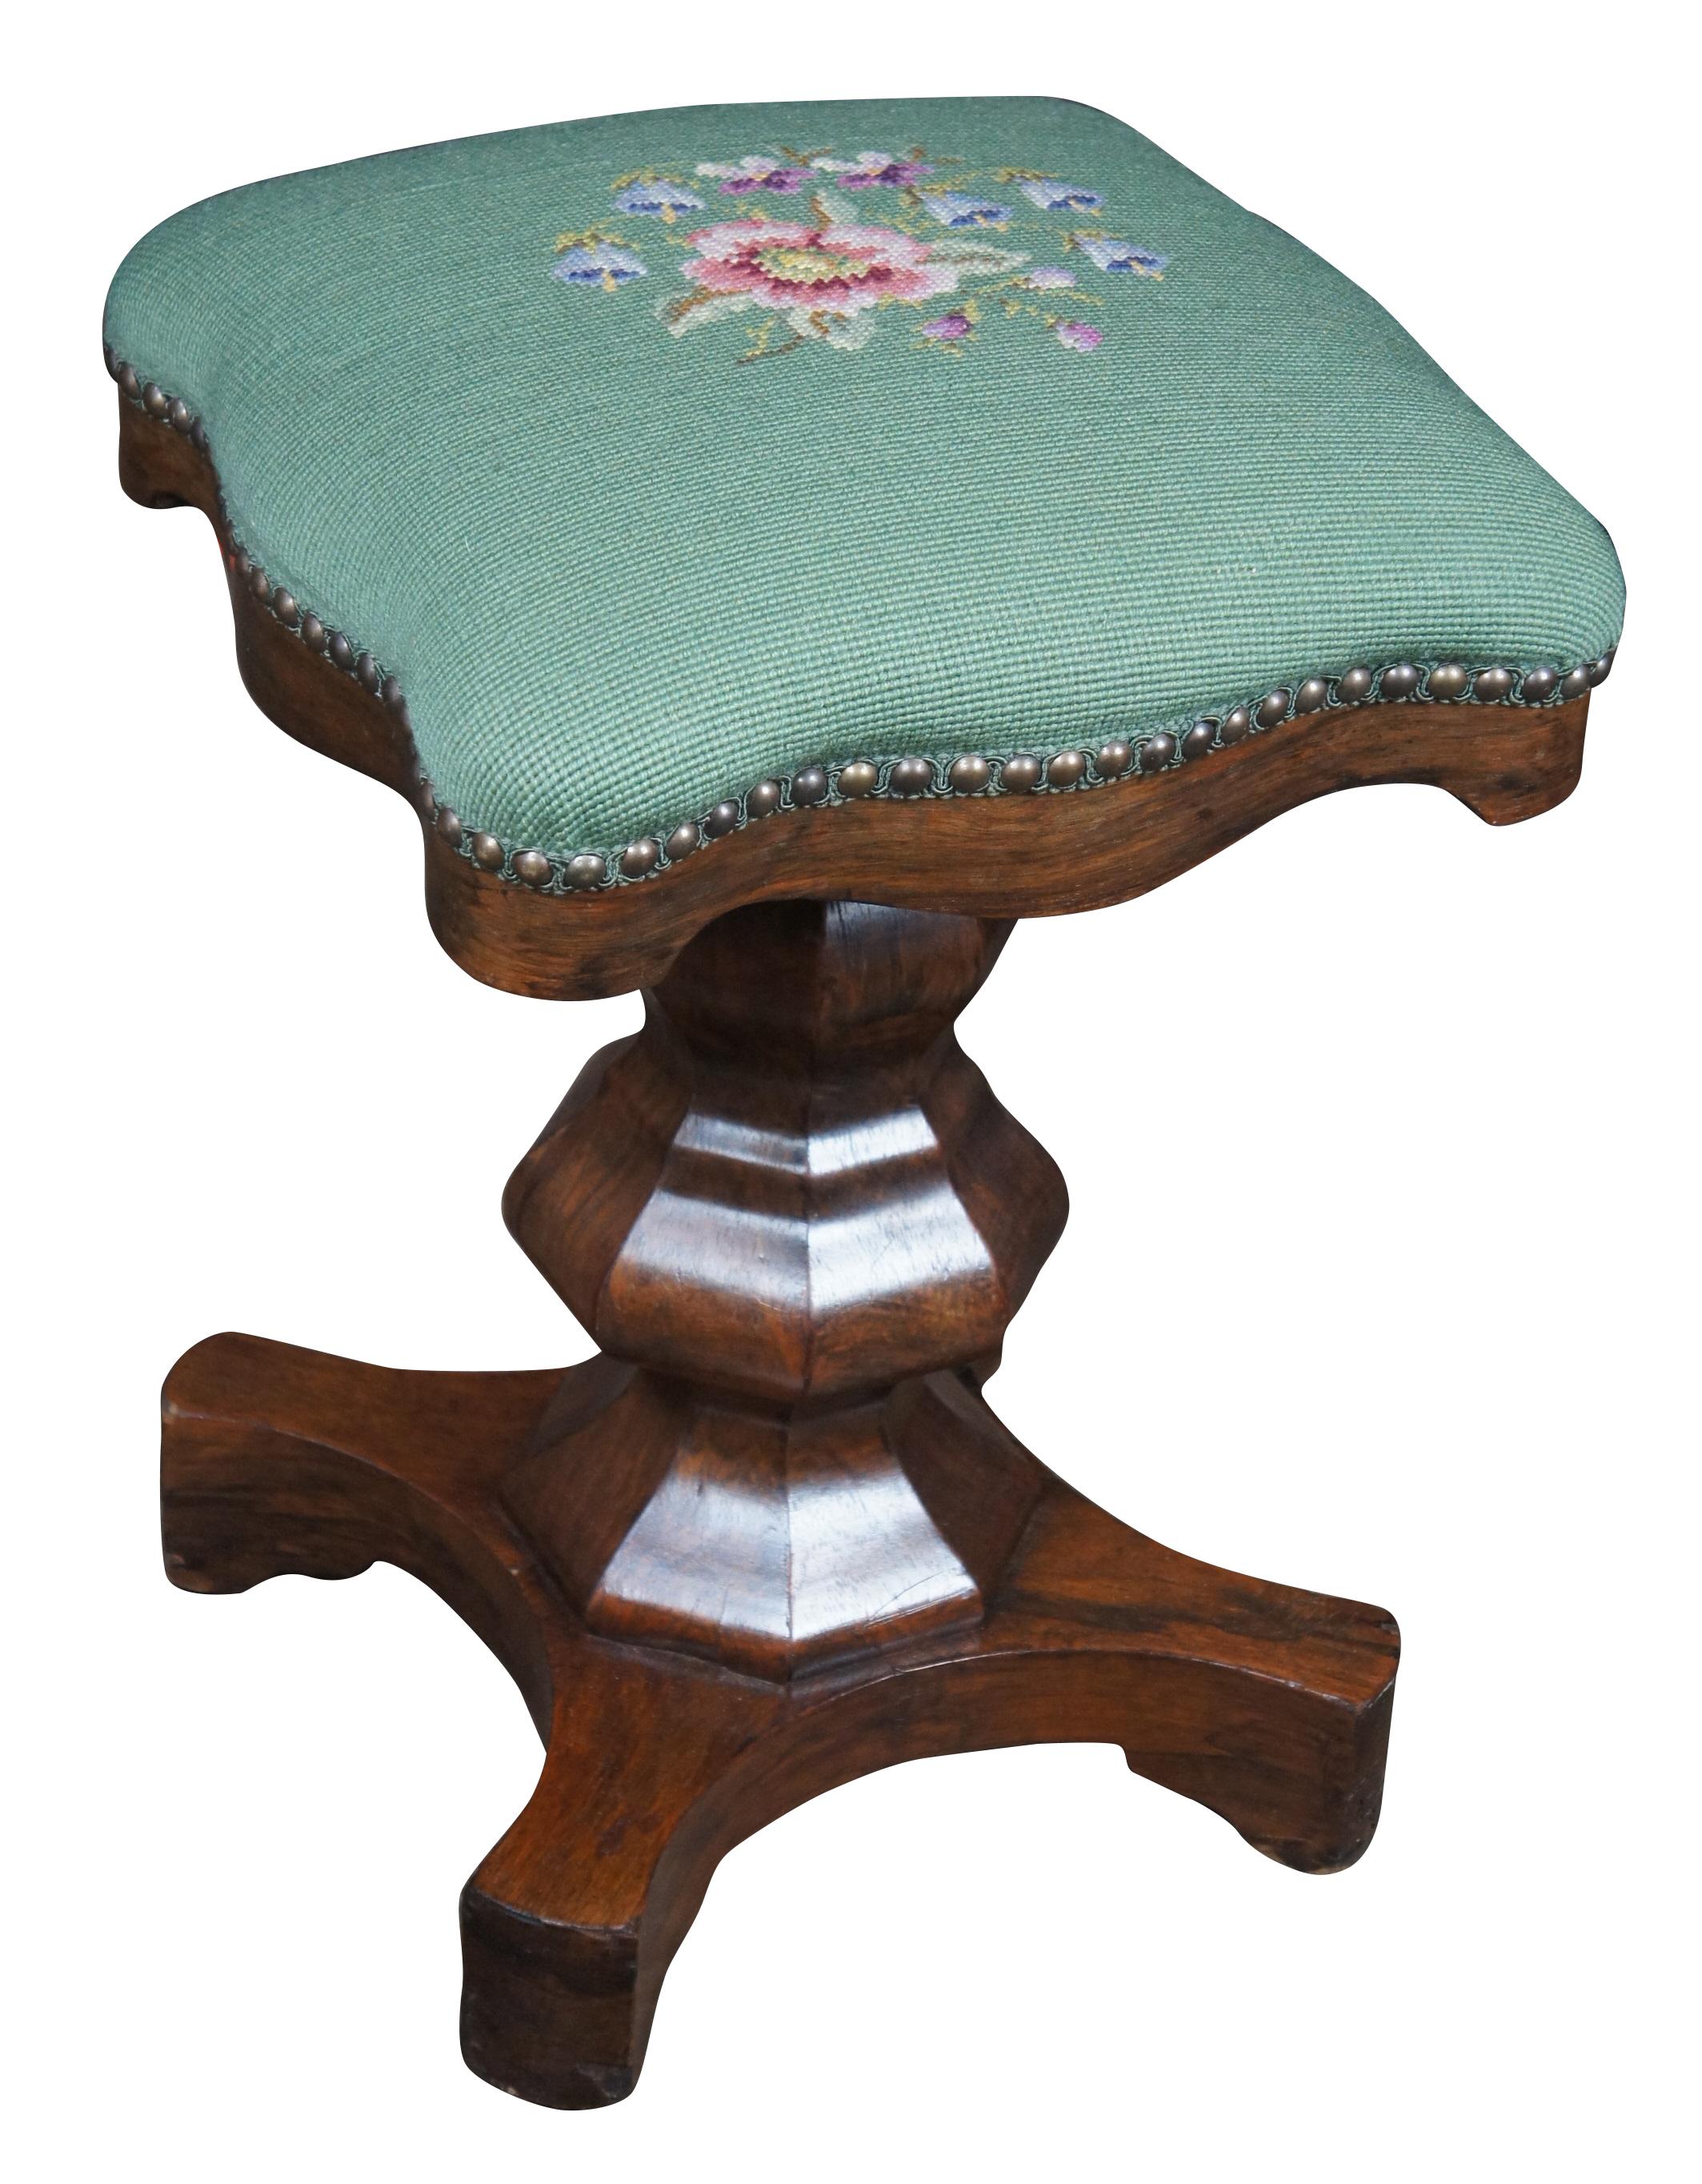 Circa 1850s American Empire Adjustable Piano stool. Features a serpentine seat with a green floral needlepoint embroidered cushion. Classic lines and sturdy construction give this piece timeless appeal.
 